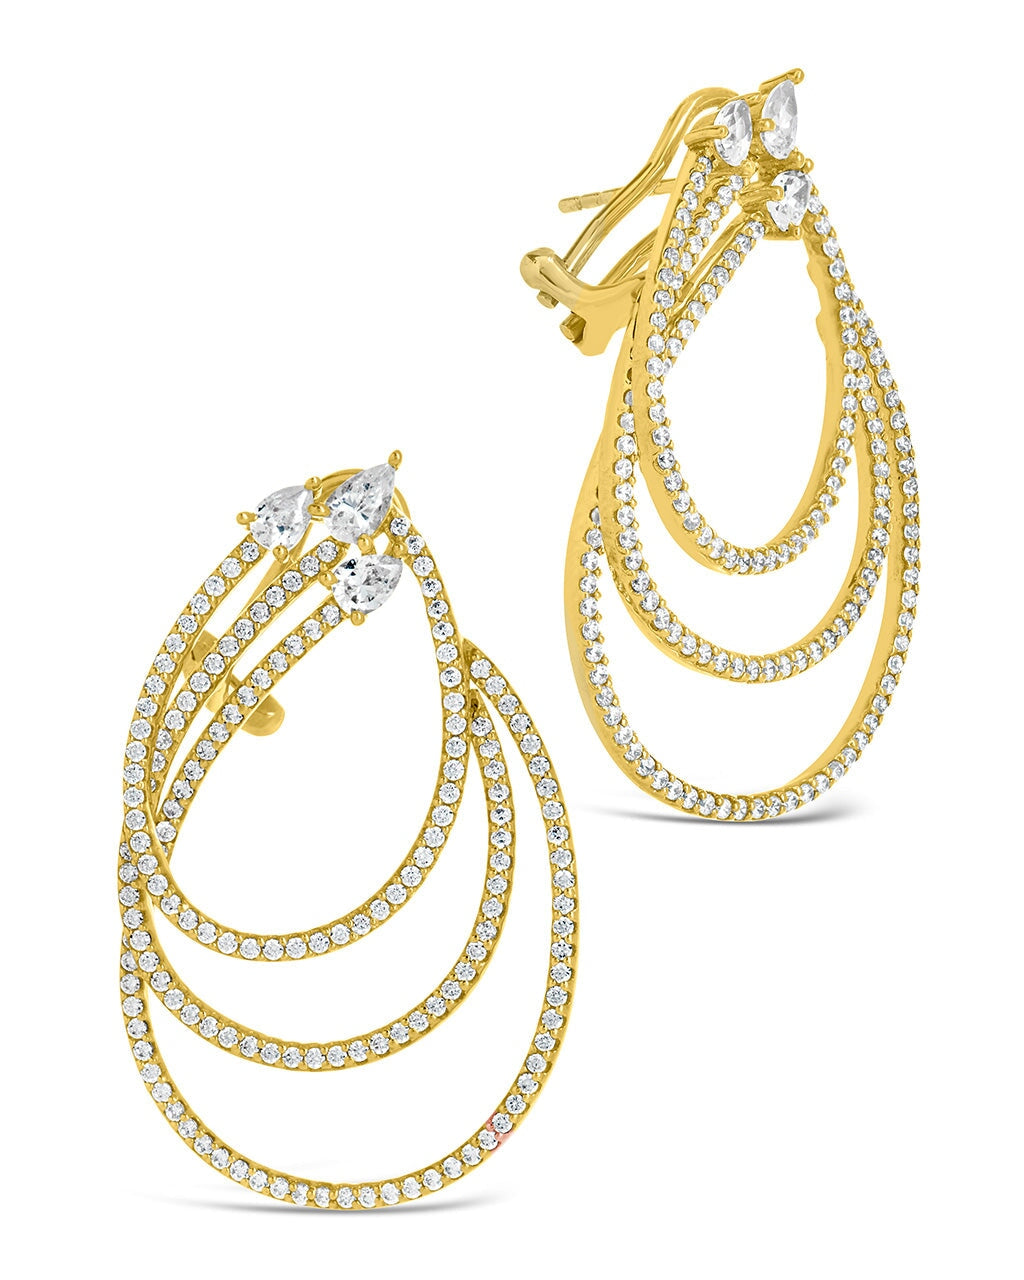 Kaia Statement Drop Earrings Earring Sterling Forever Gold 